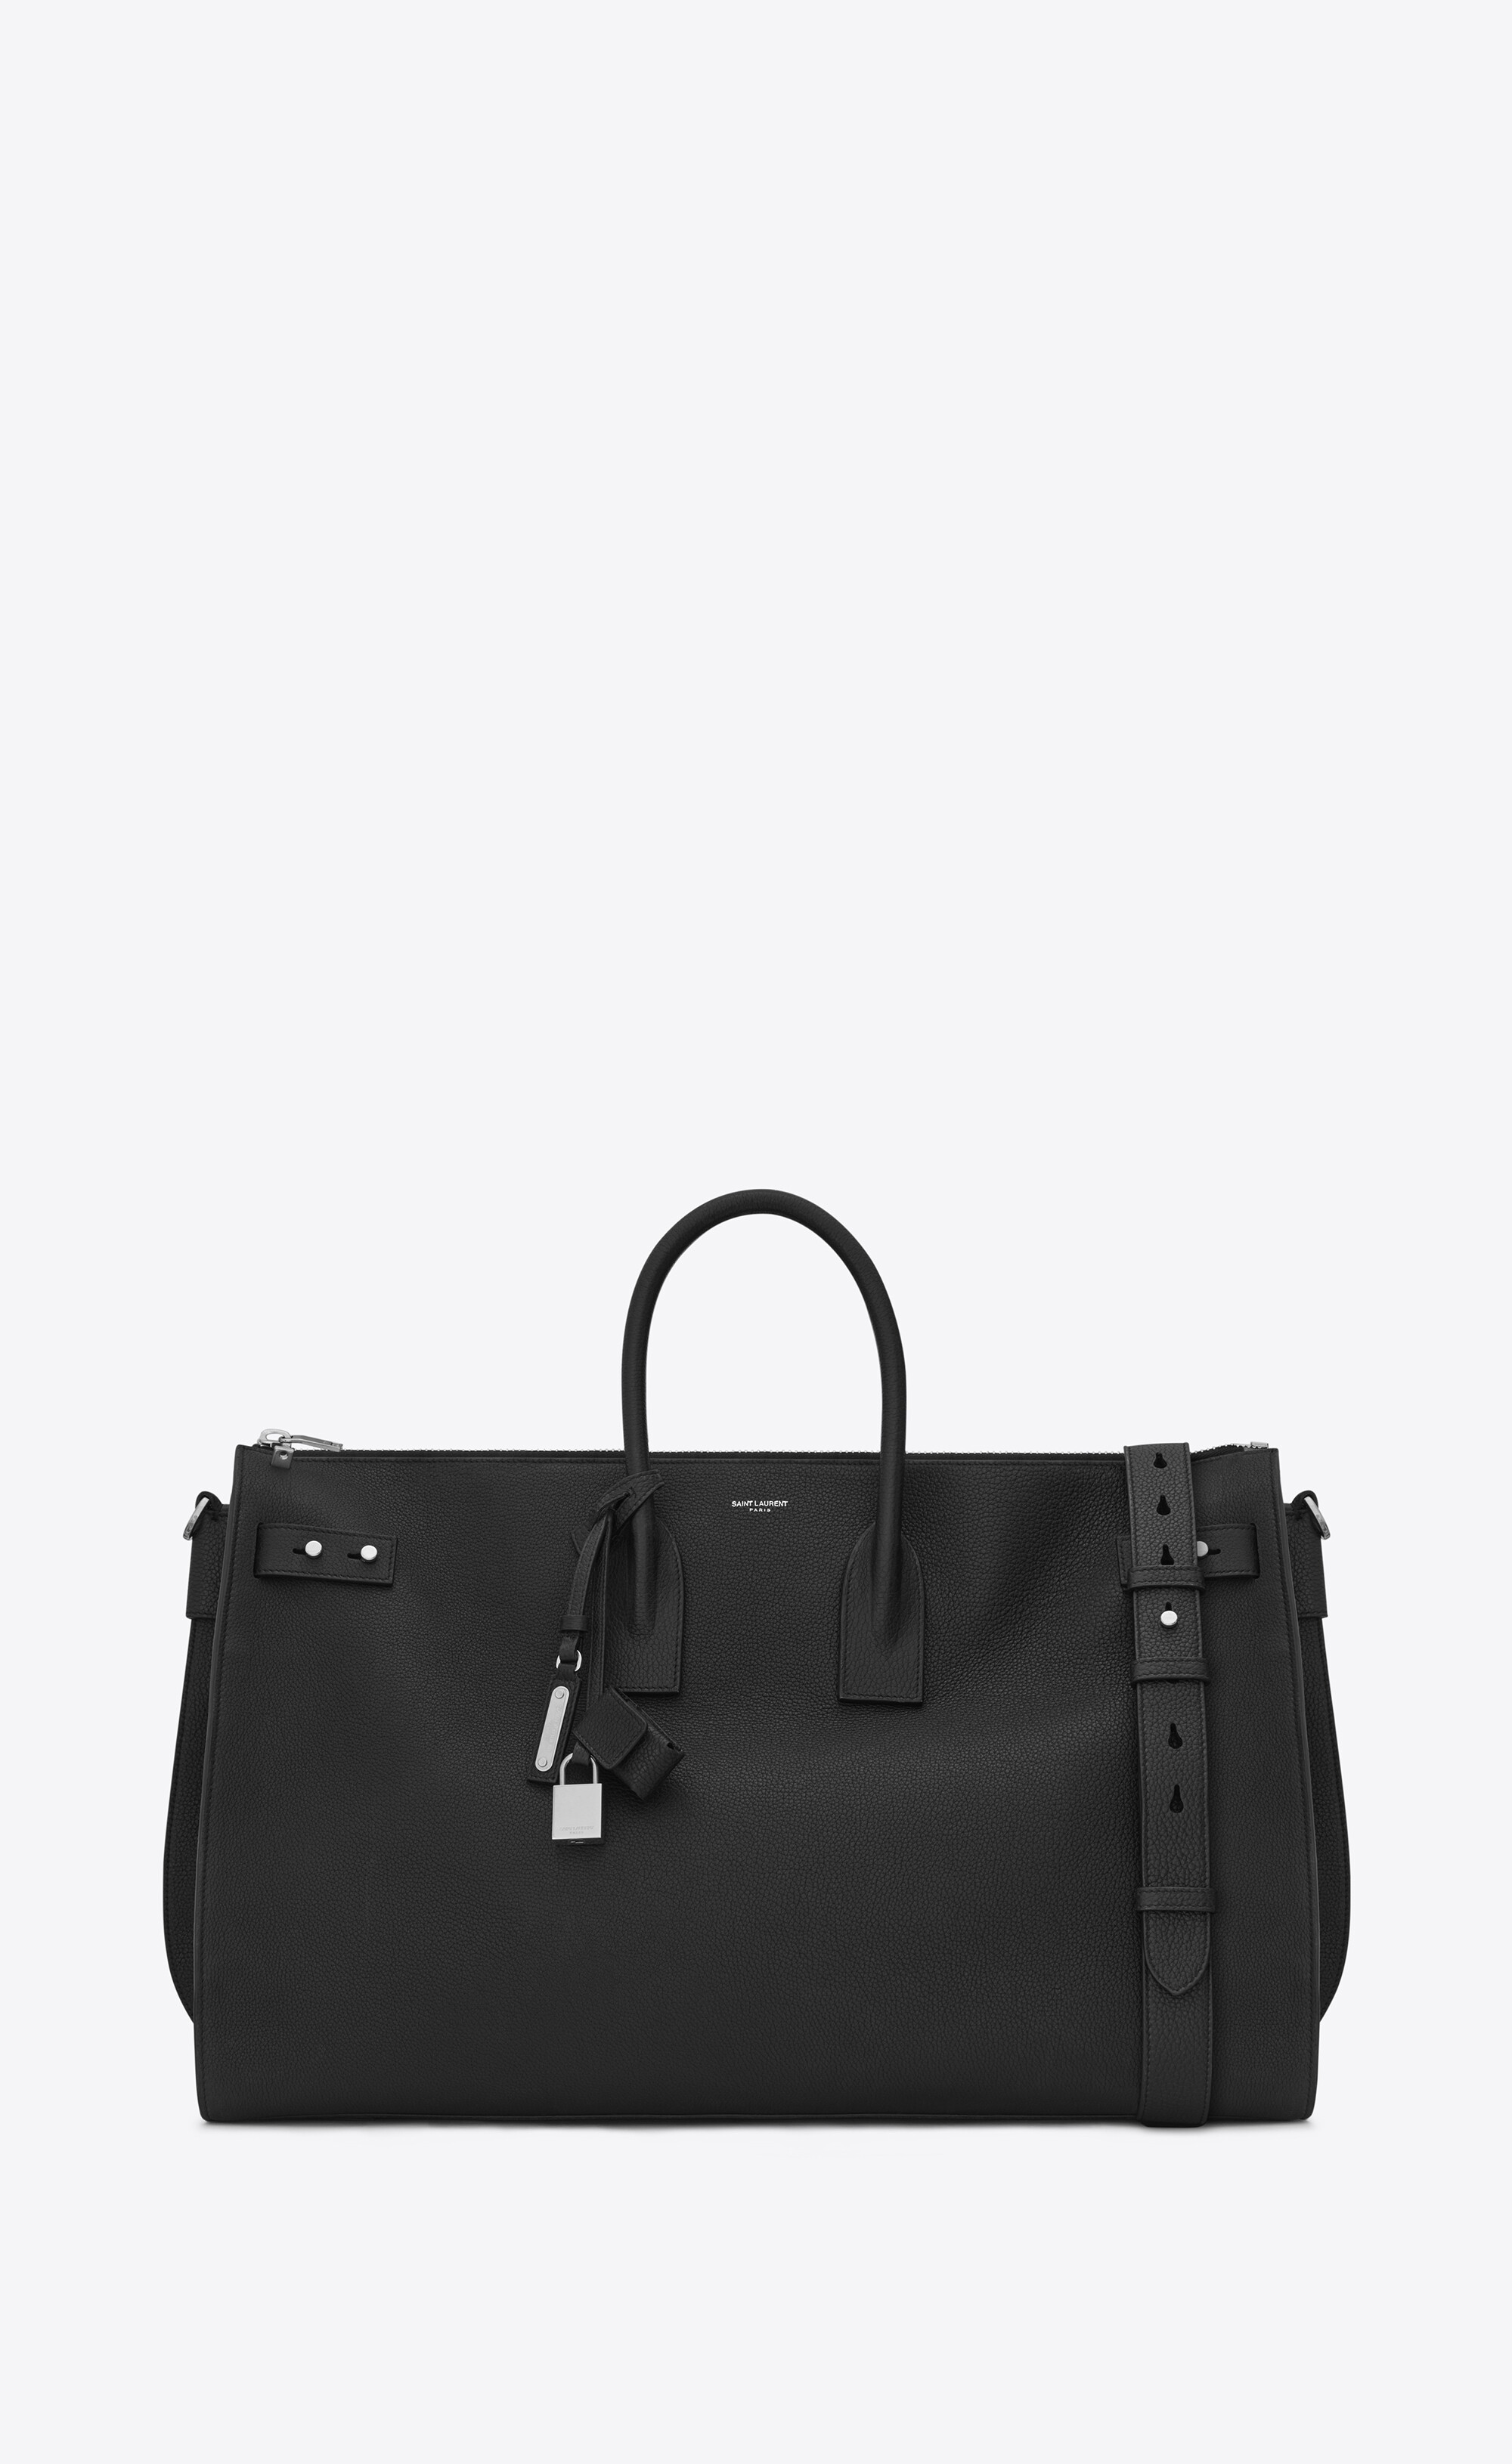 Saint Laurent Sac De Jour Size Guide: The Bag Of The Day And The